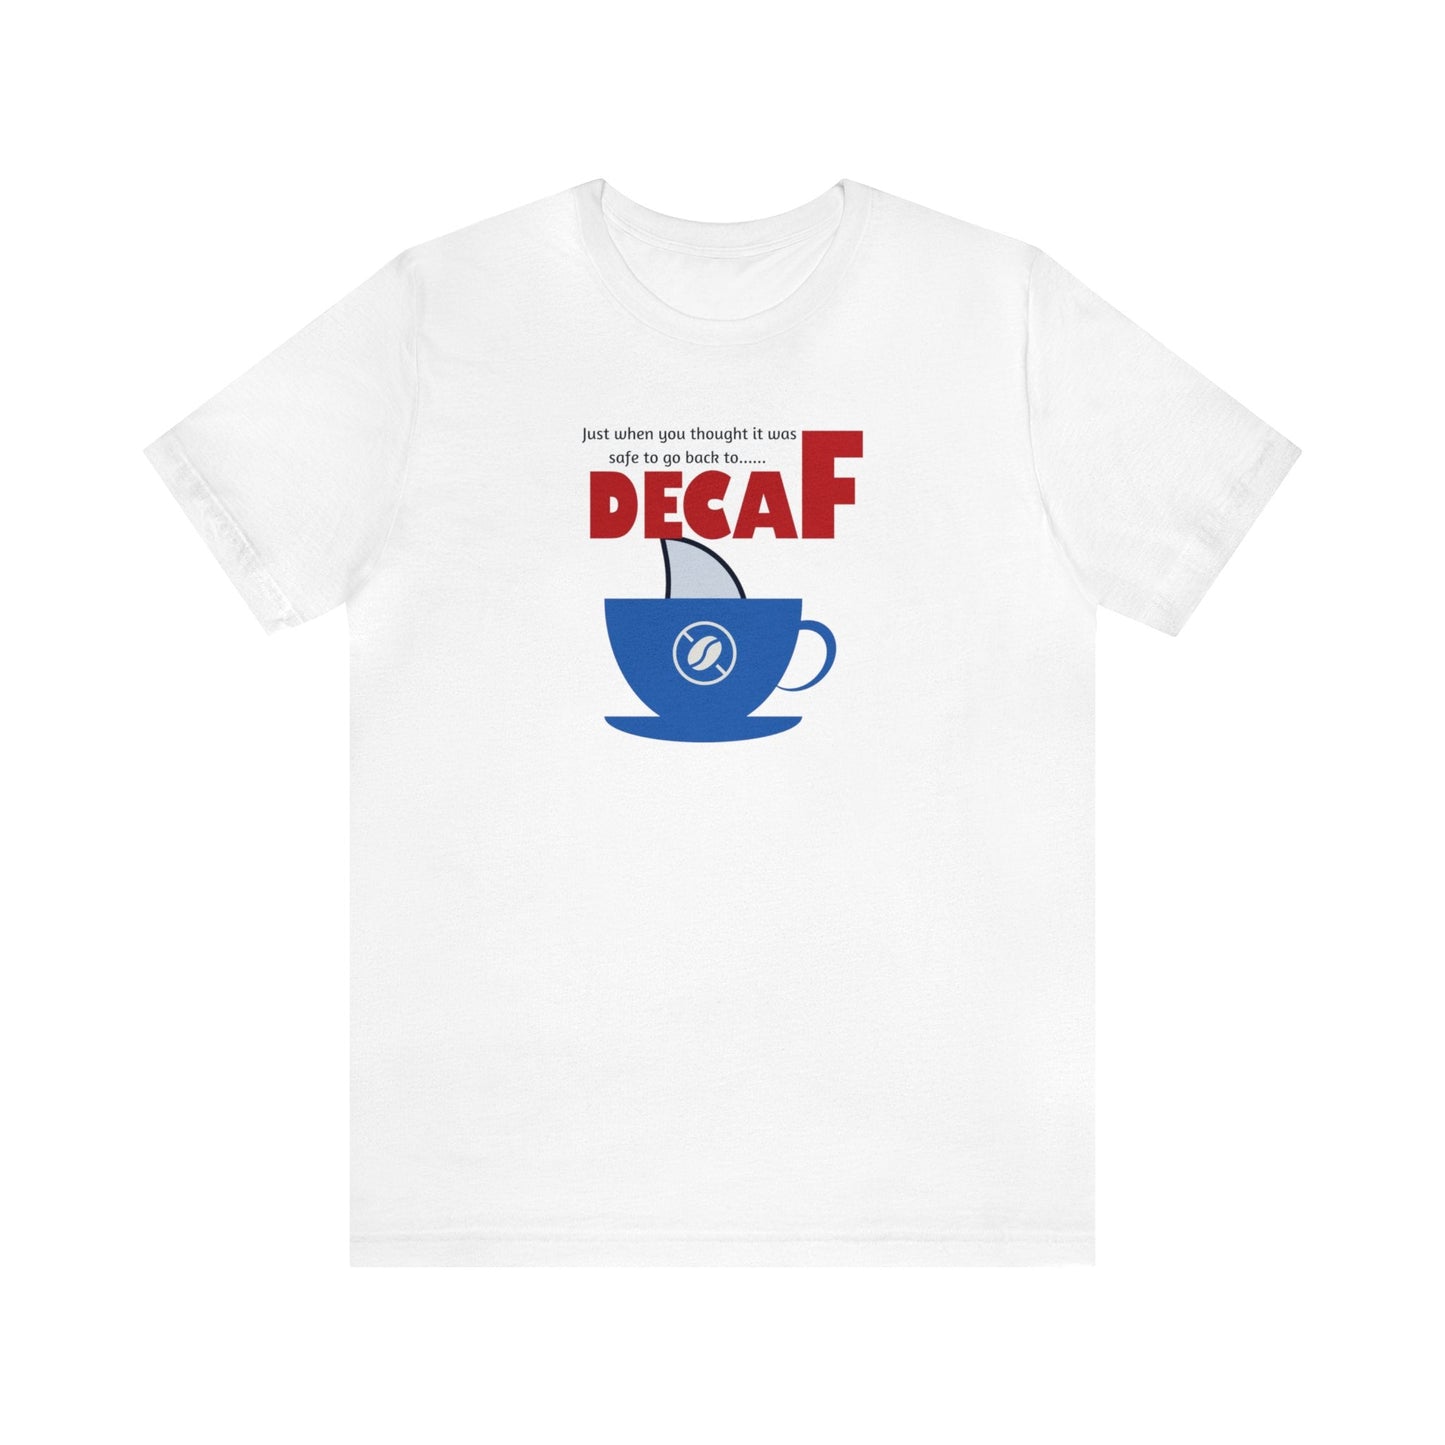 Just when you thought it was safe to go back to…decaf T-shirt. - InkArt Fashions